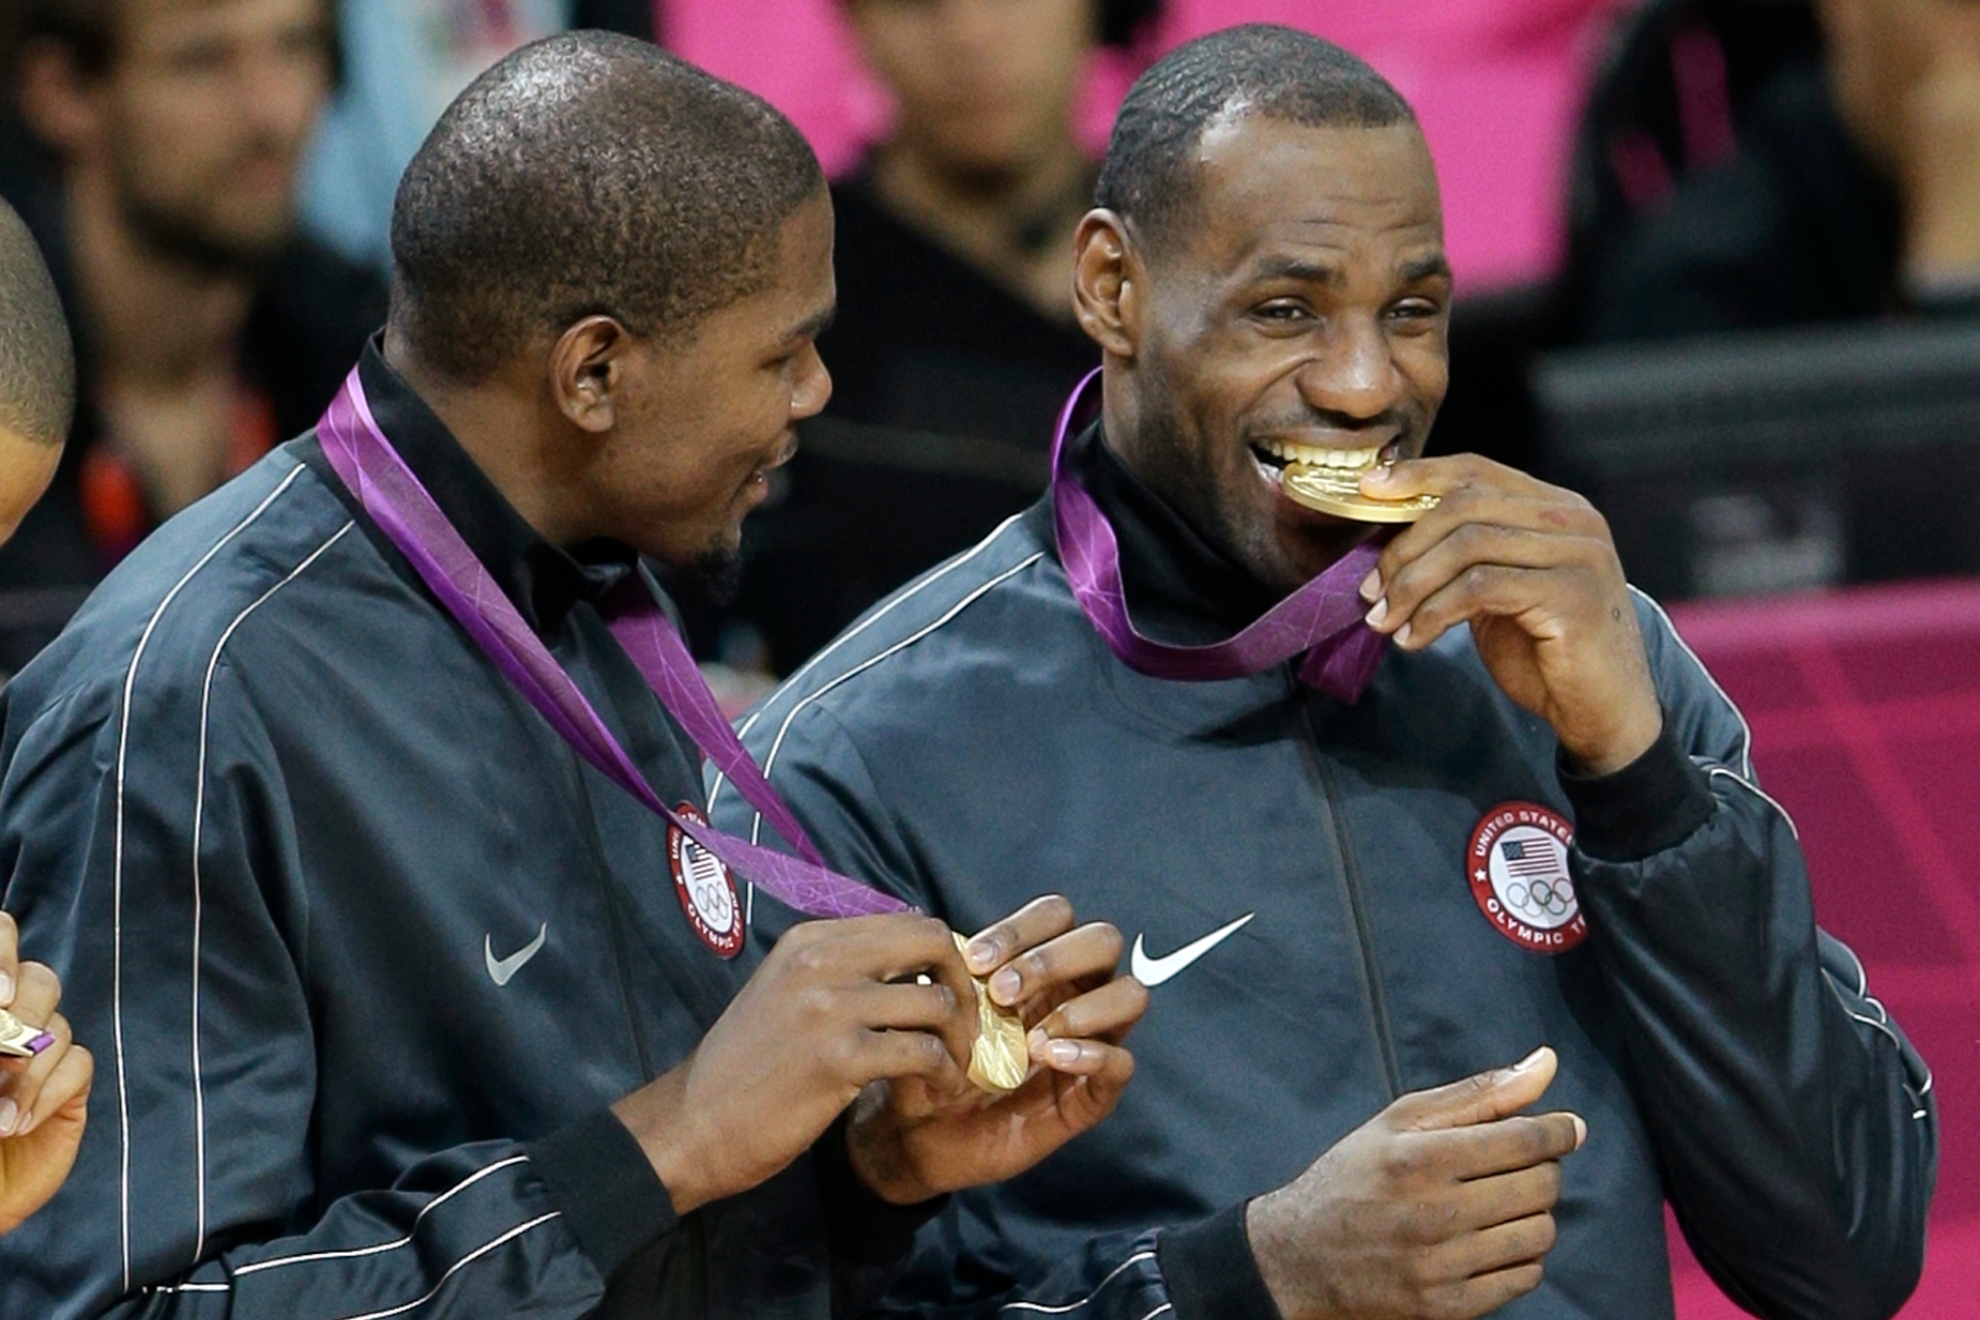 LeBron James and Kevin Durant after winning Olympic Gold